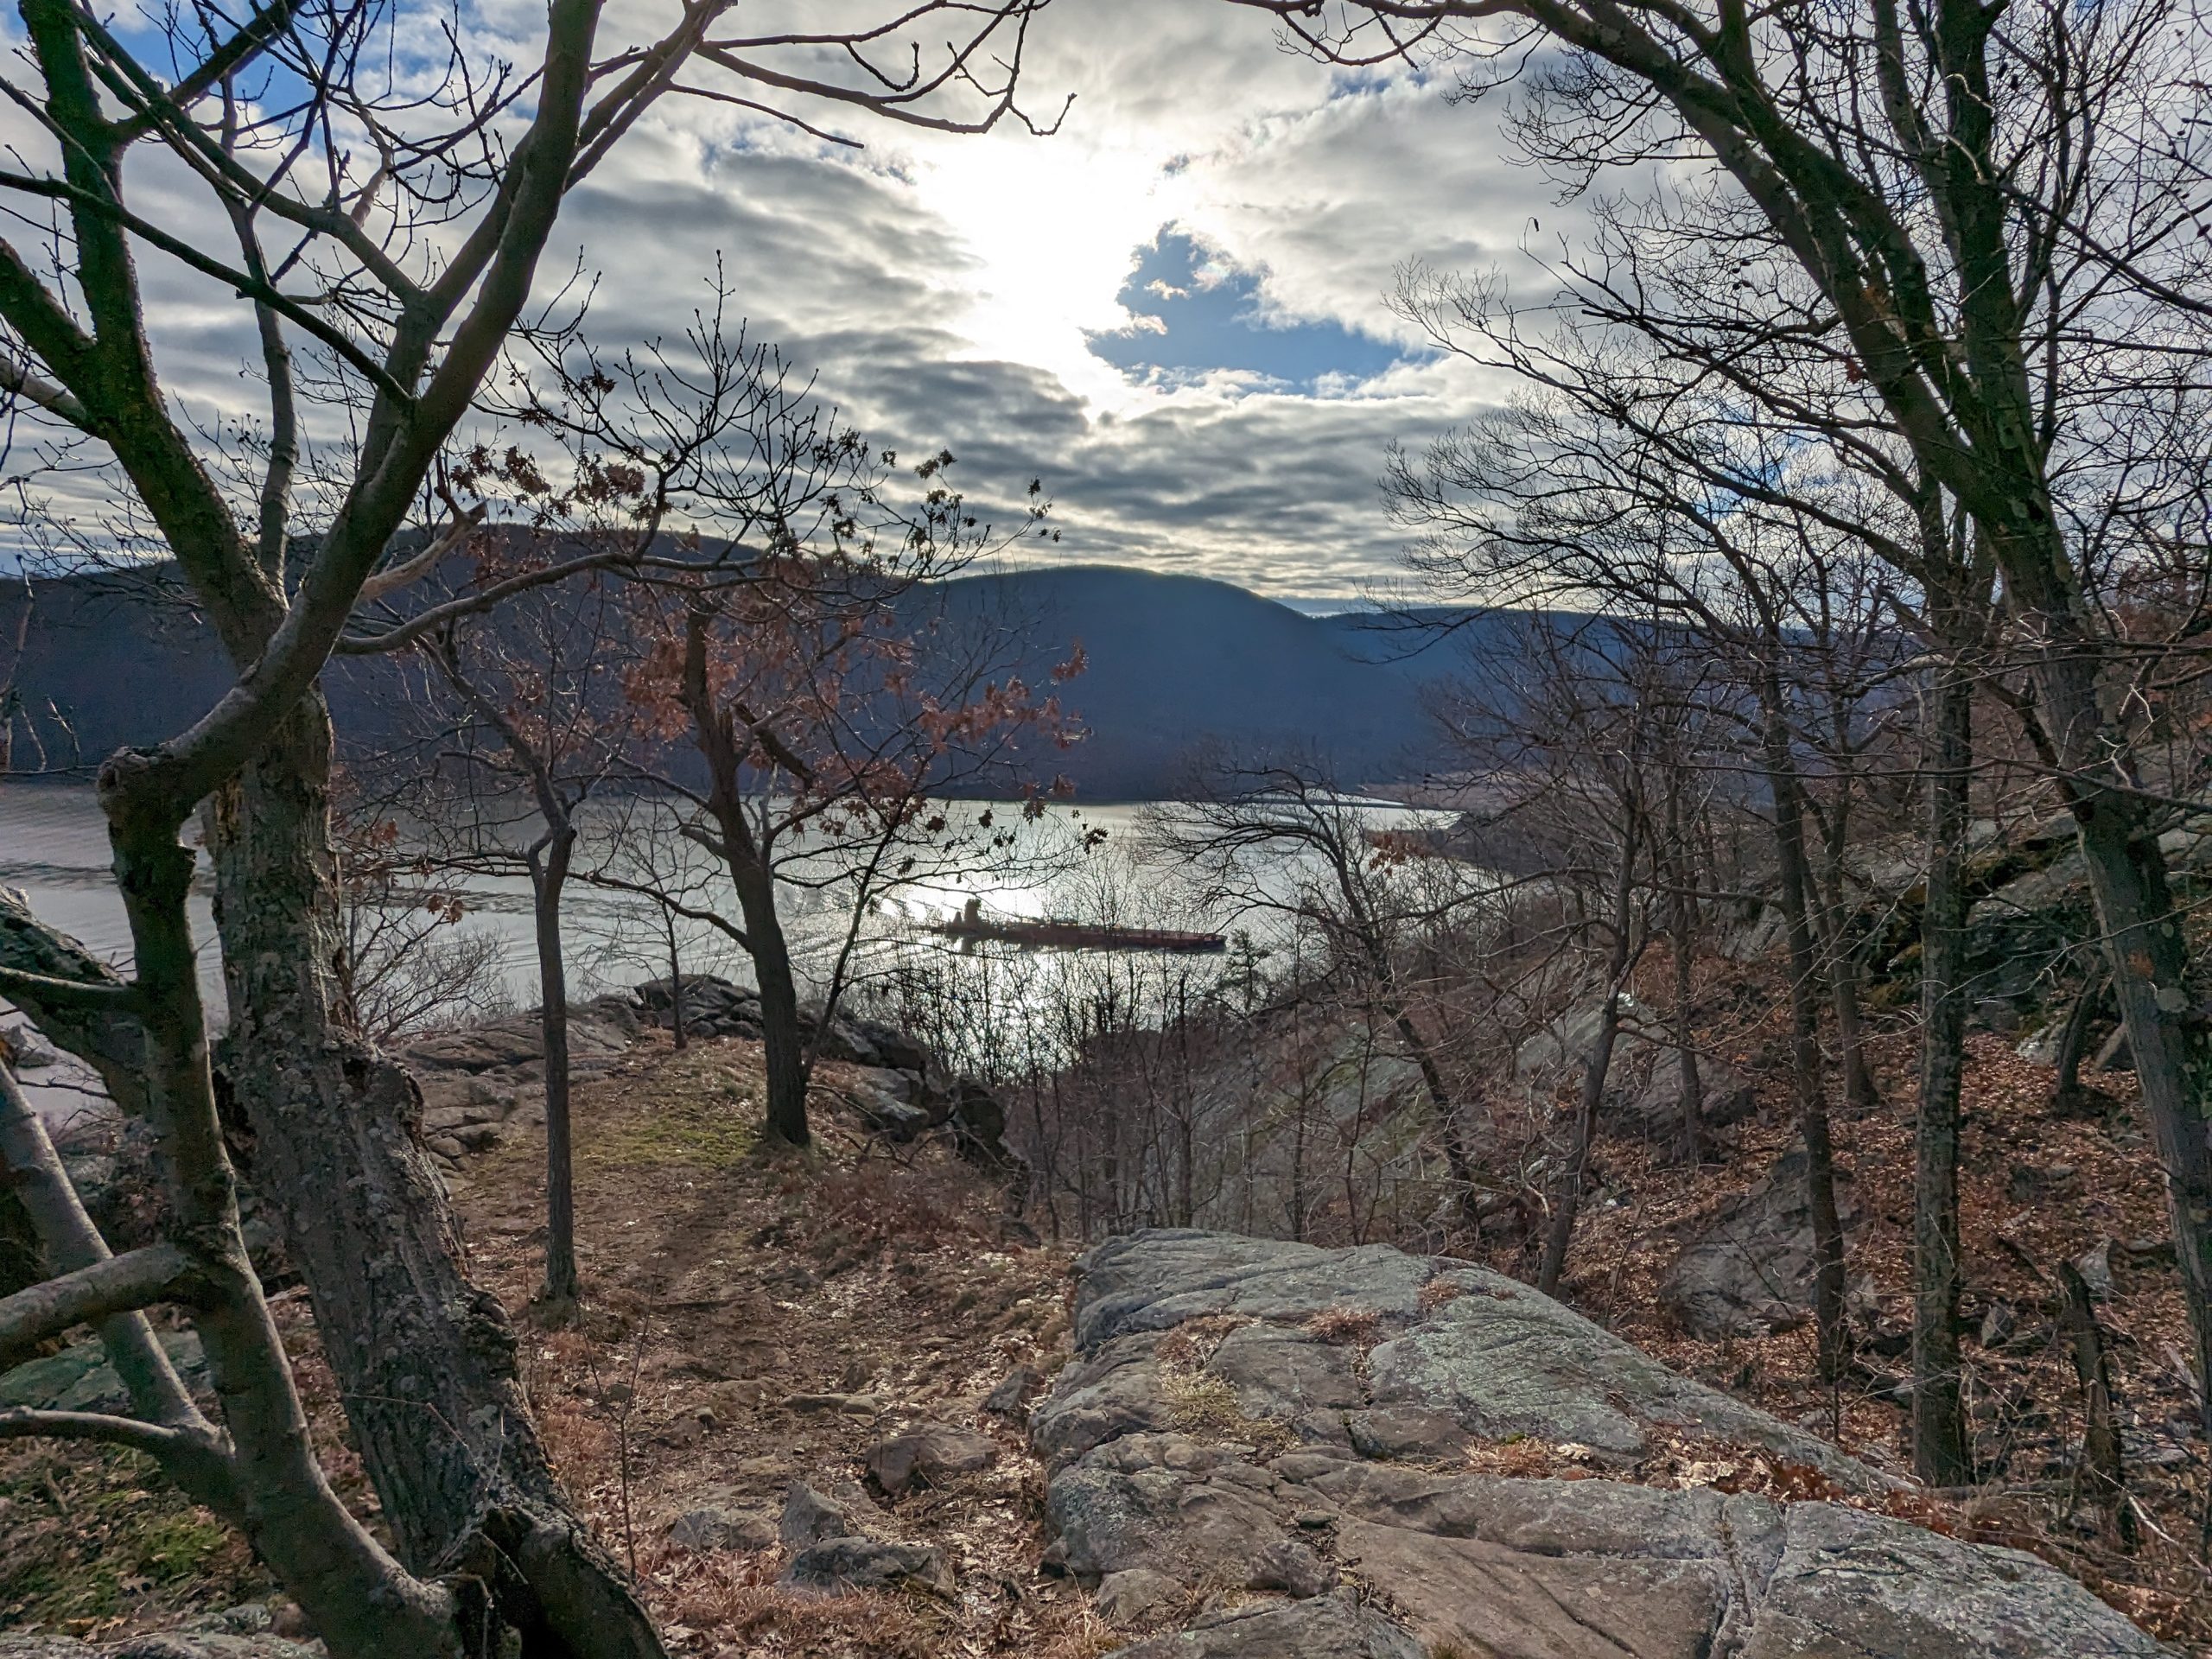 Hudson river from the mountains in the valley